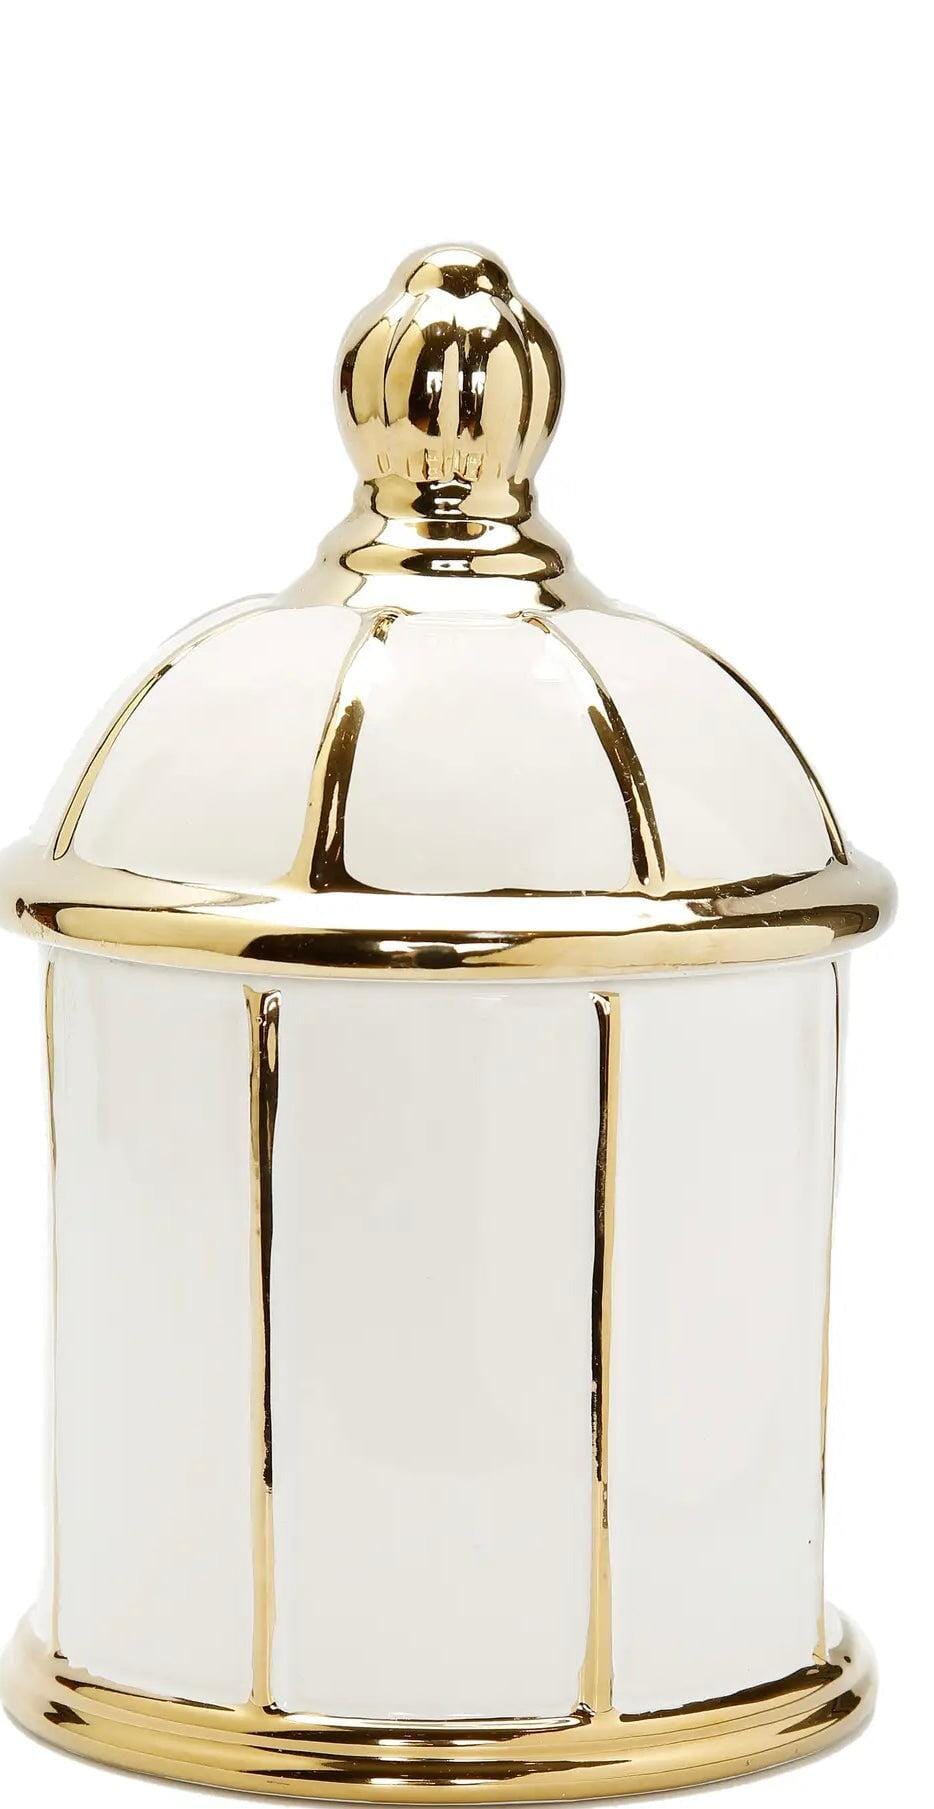 White Jar with Round Dome Cover Thin Gold Stripe Design Decorative Jars High Class Touch - Home Decor 